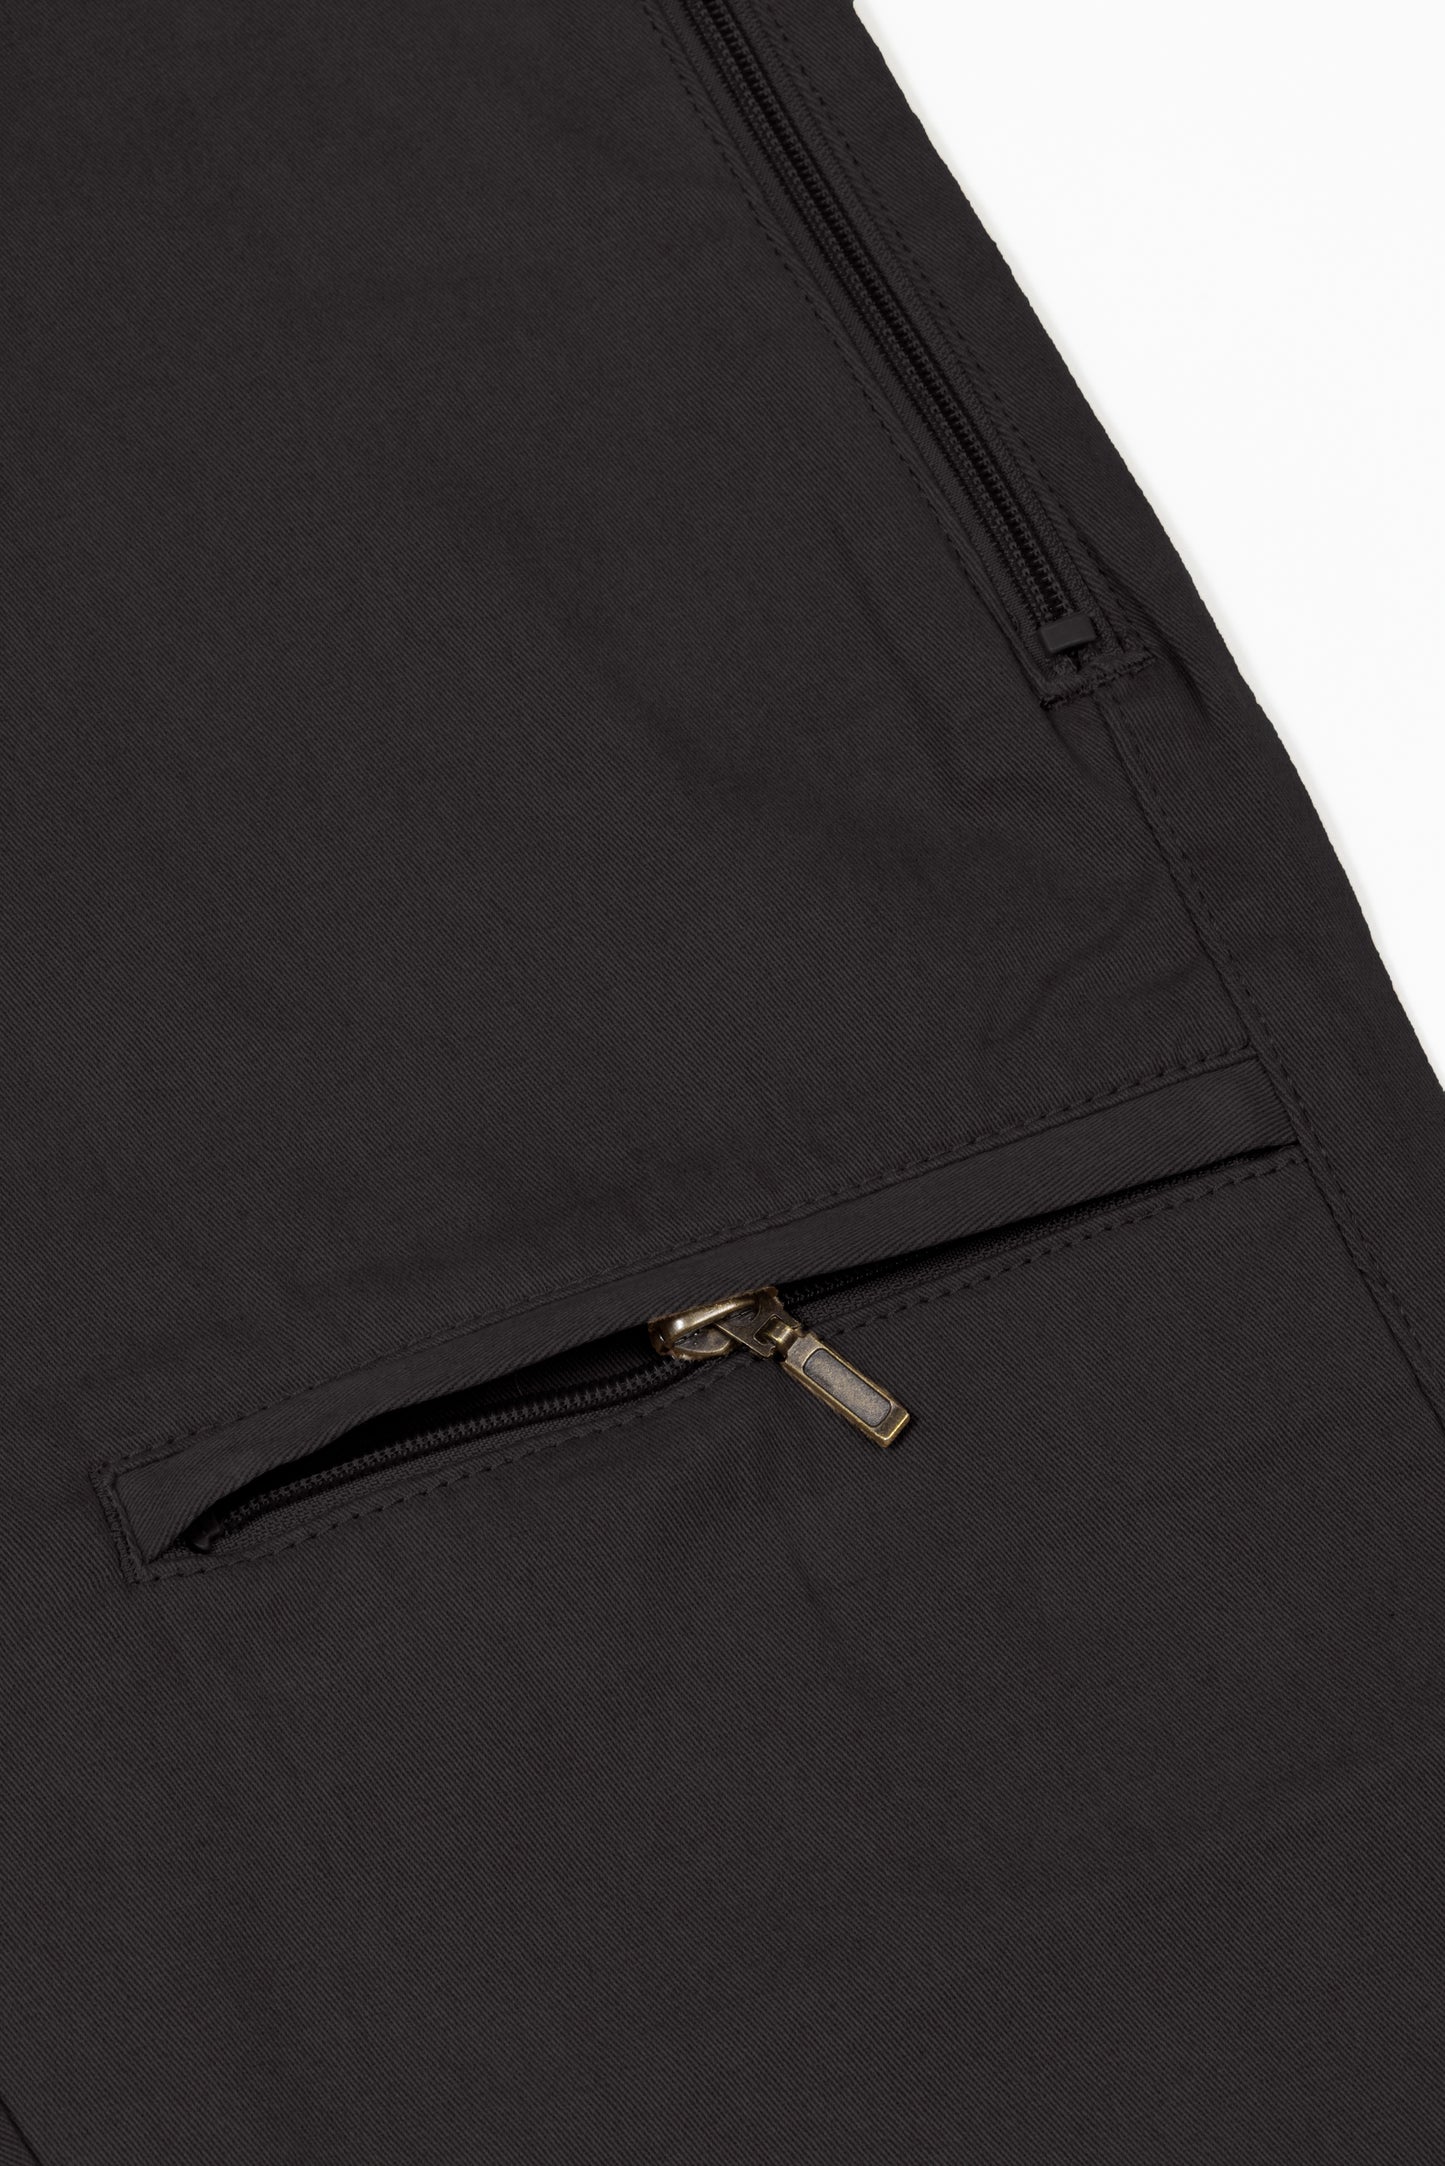 The close up of the hip pockets. It's zipped.